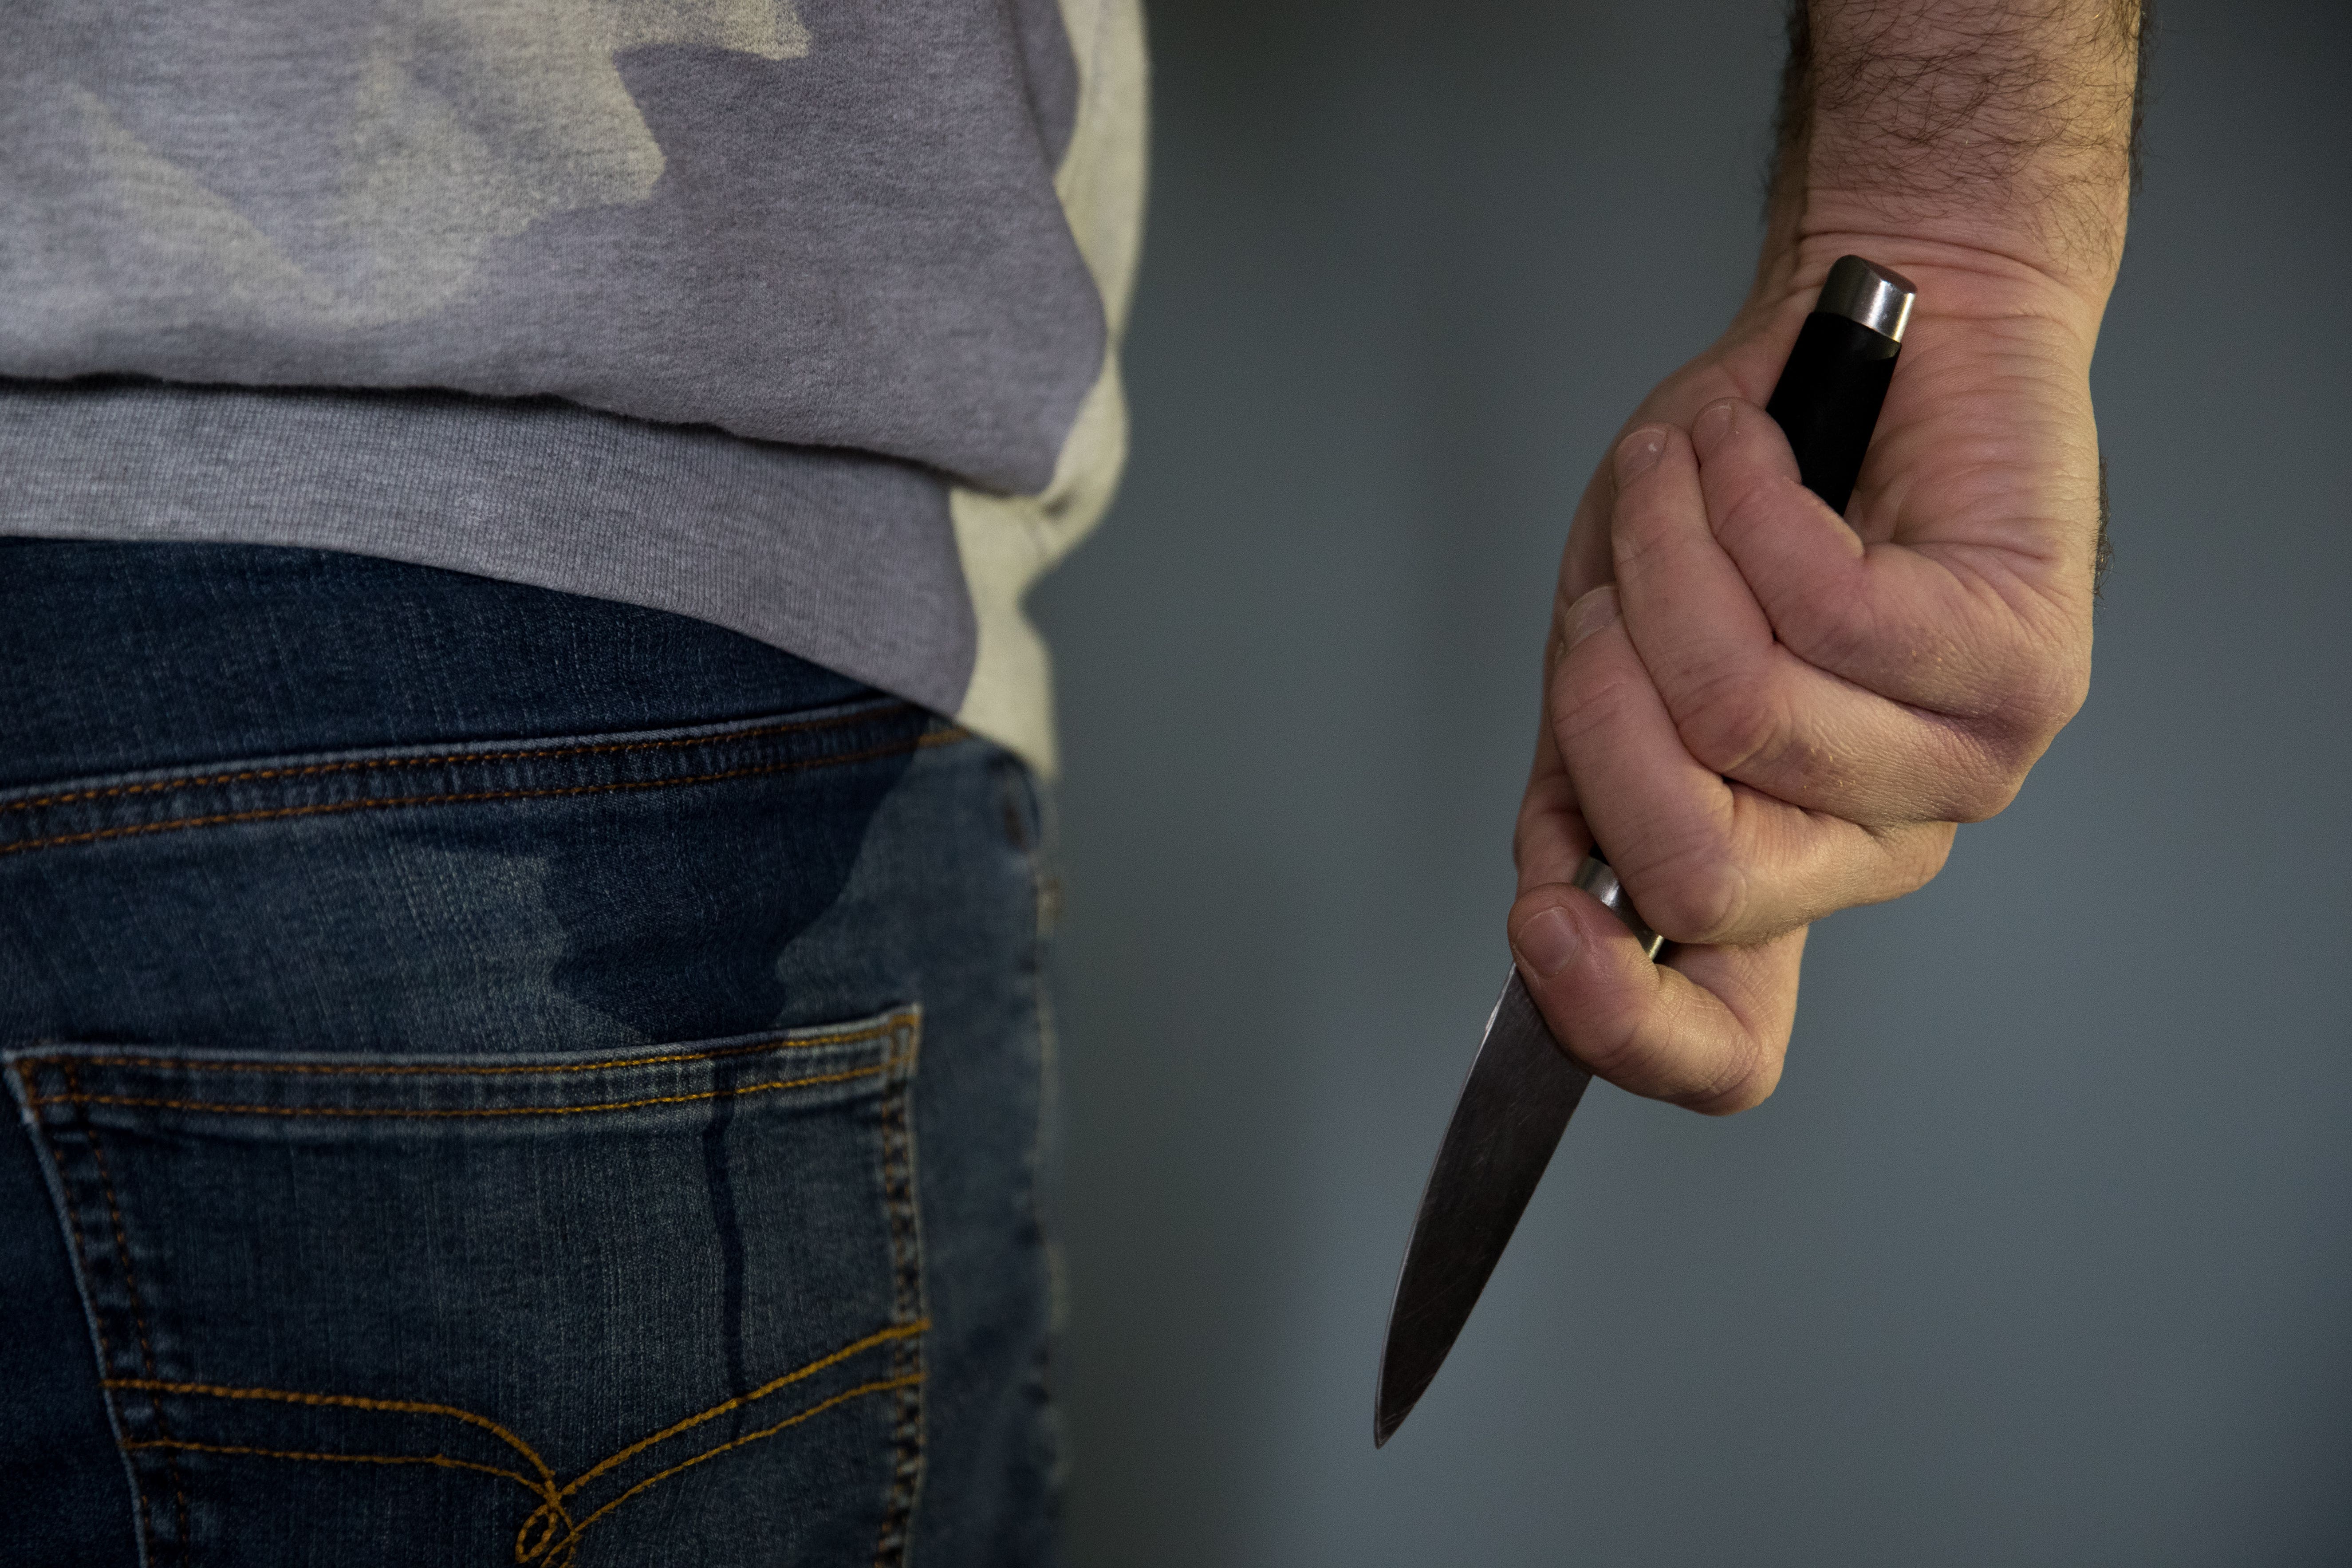 The number of people killed with a sharp instrument, including knives, in England and Wales in the year to March 2022 was 261, the highest since records began (Andrew Matthews/PA)